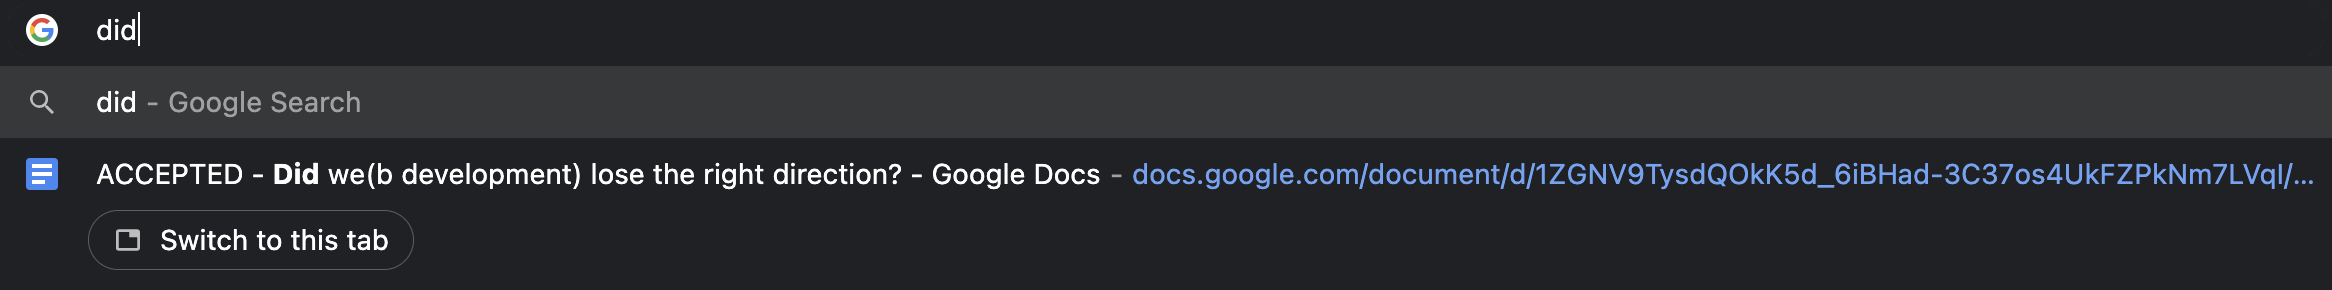 Chrome URL bar without auto suggestions.